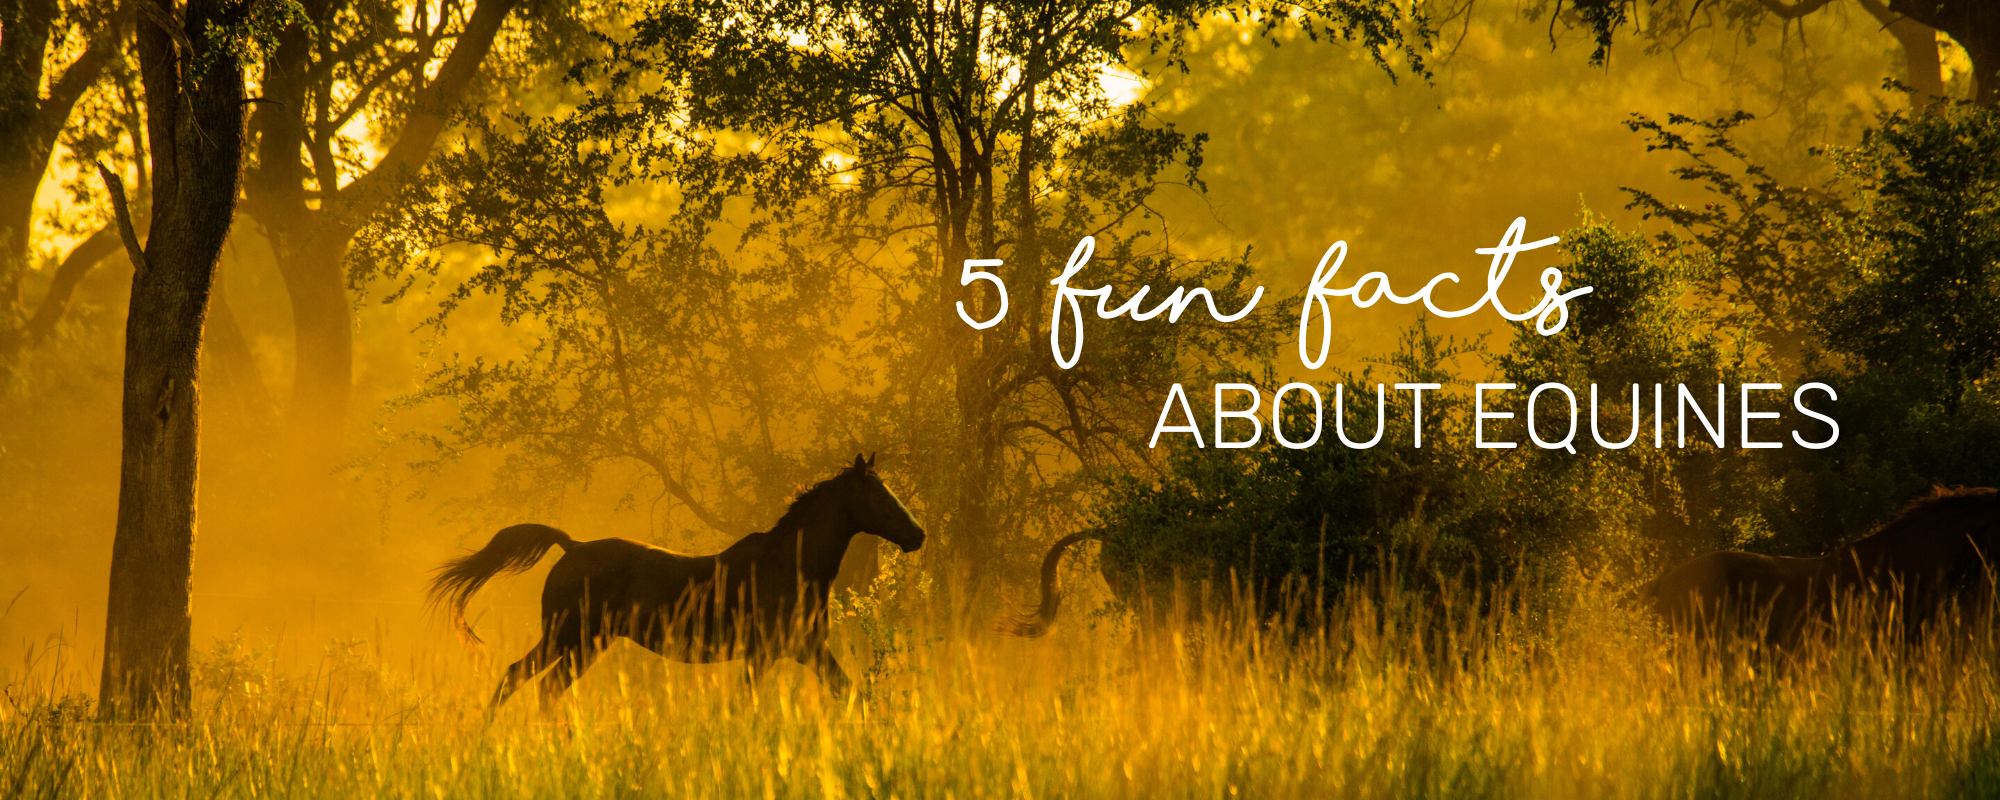 5 FUN FACTS ABOUT EQUINES